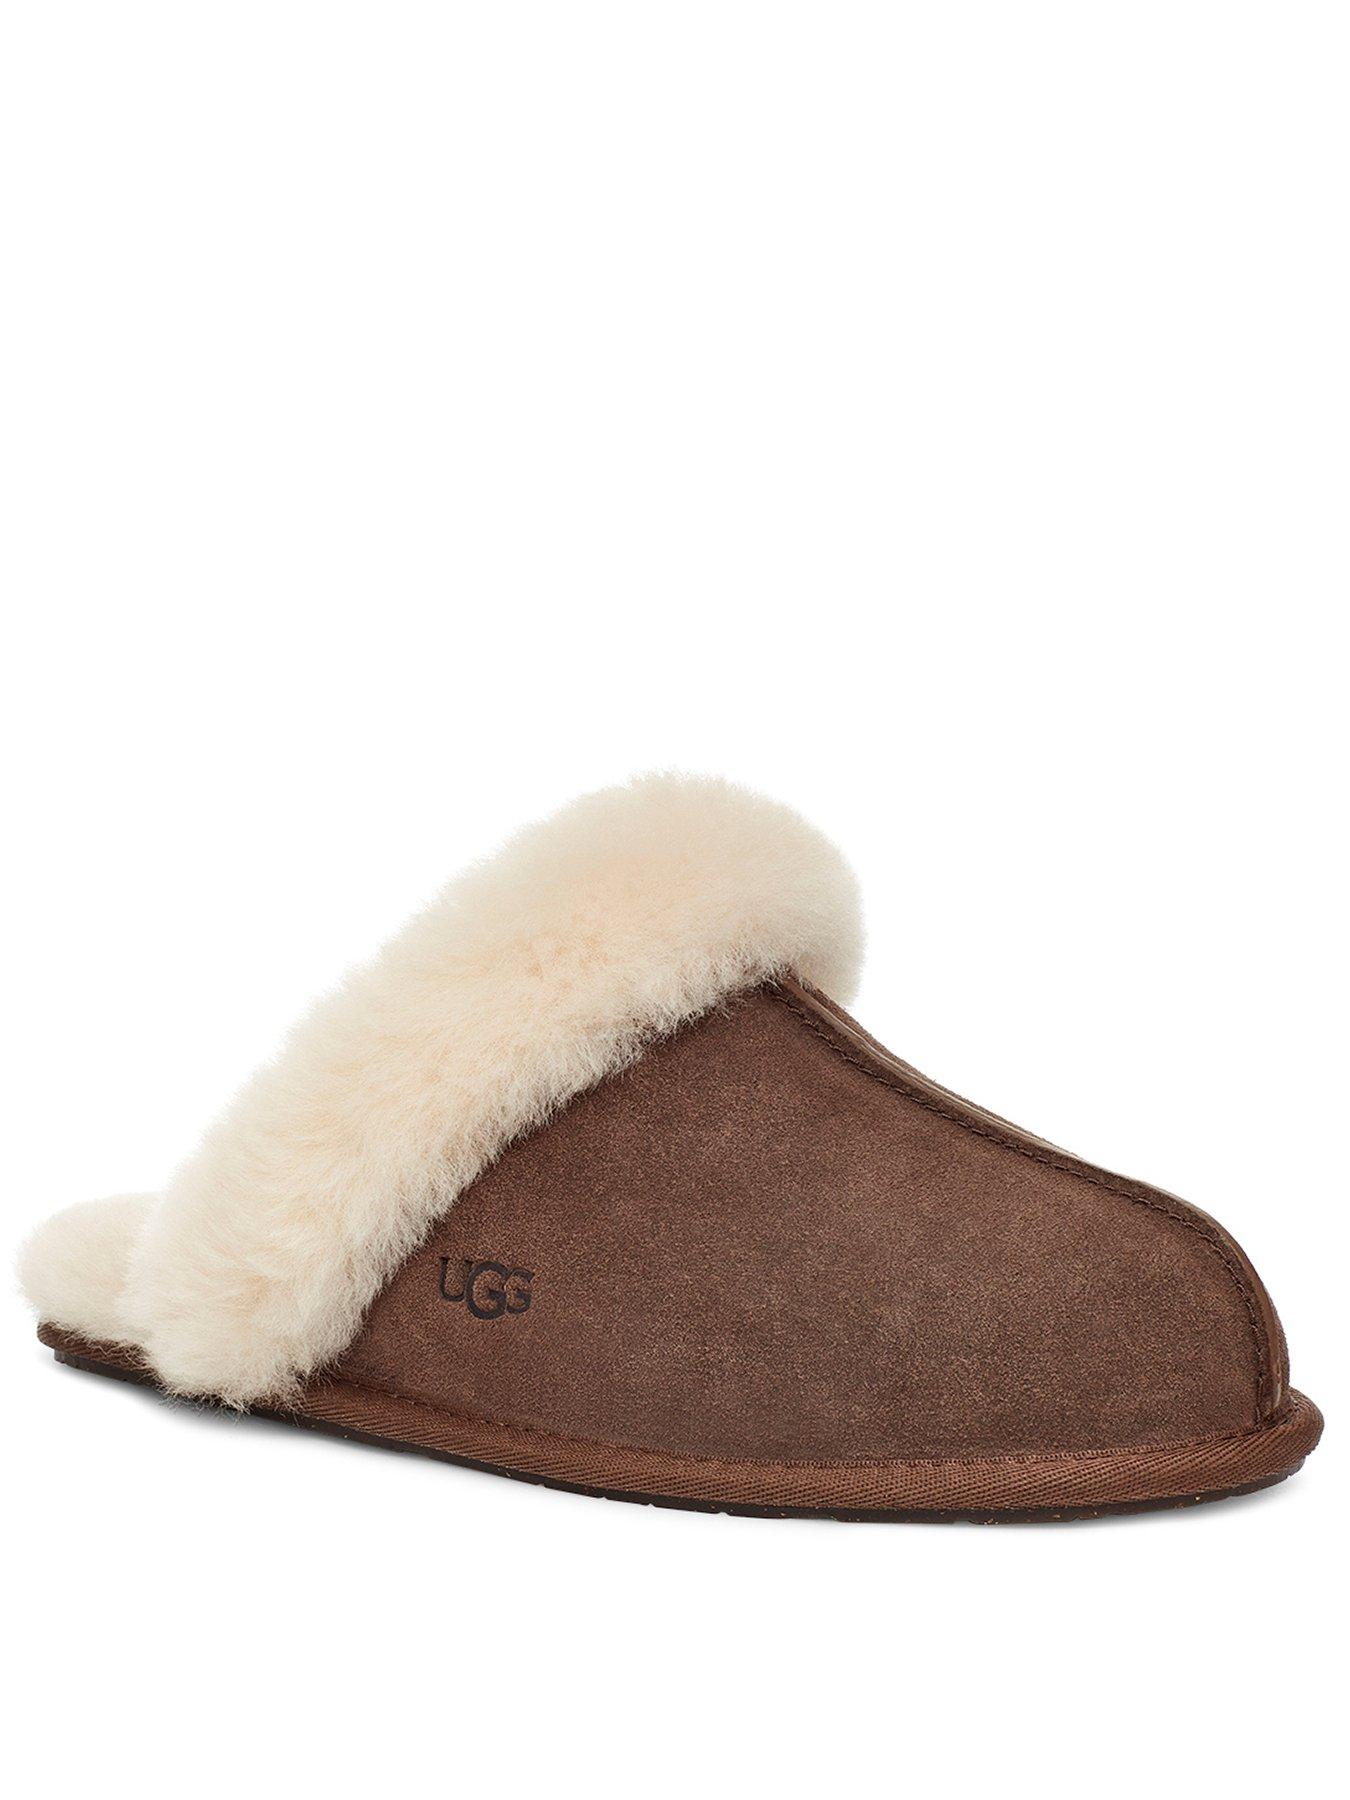 womens ugg slippers size 5